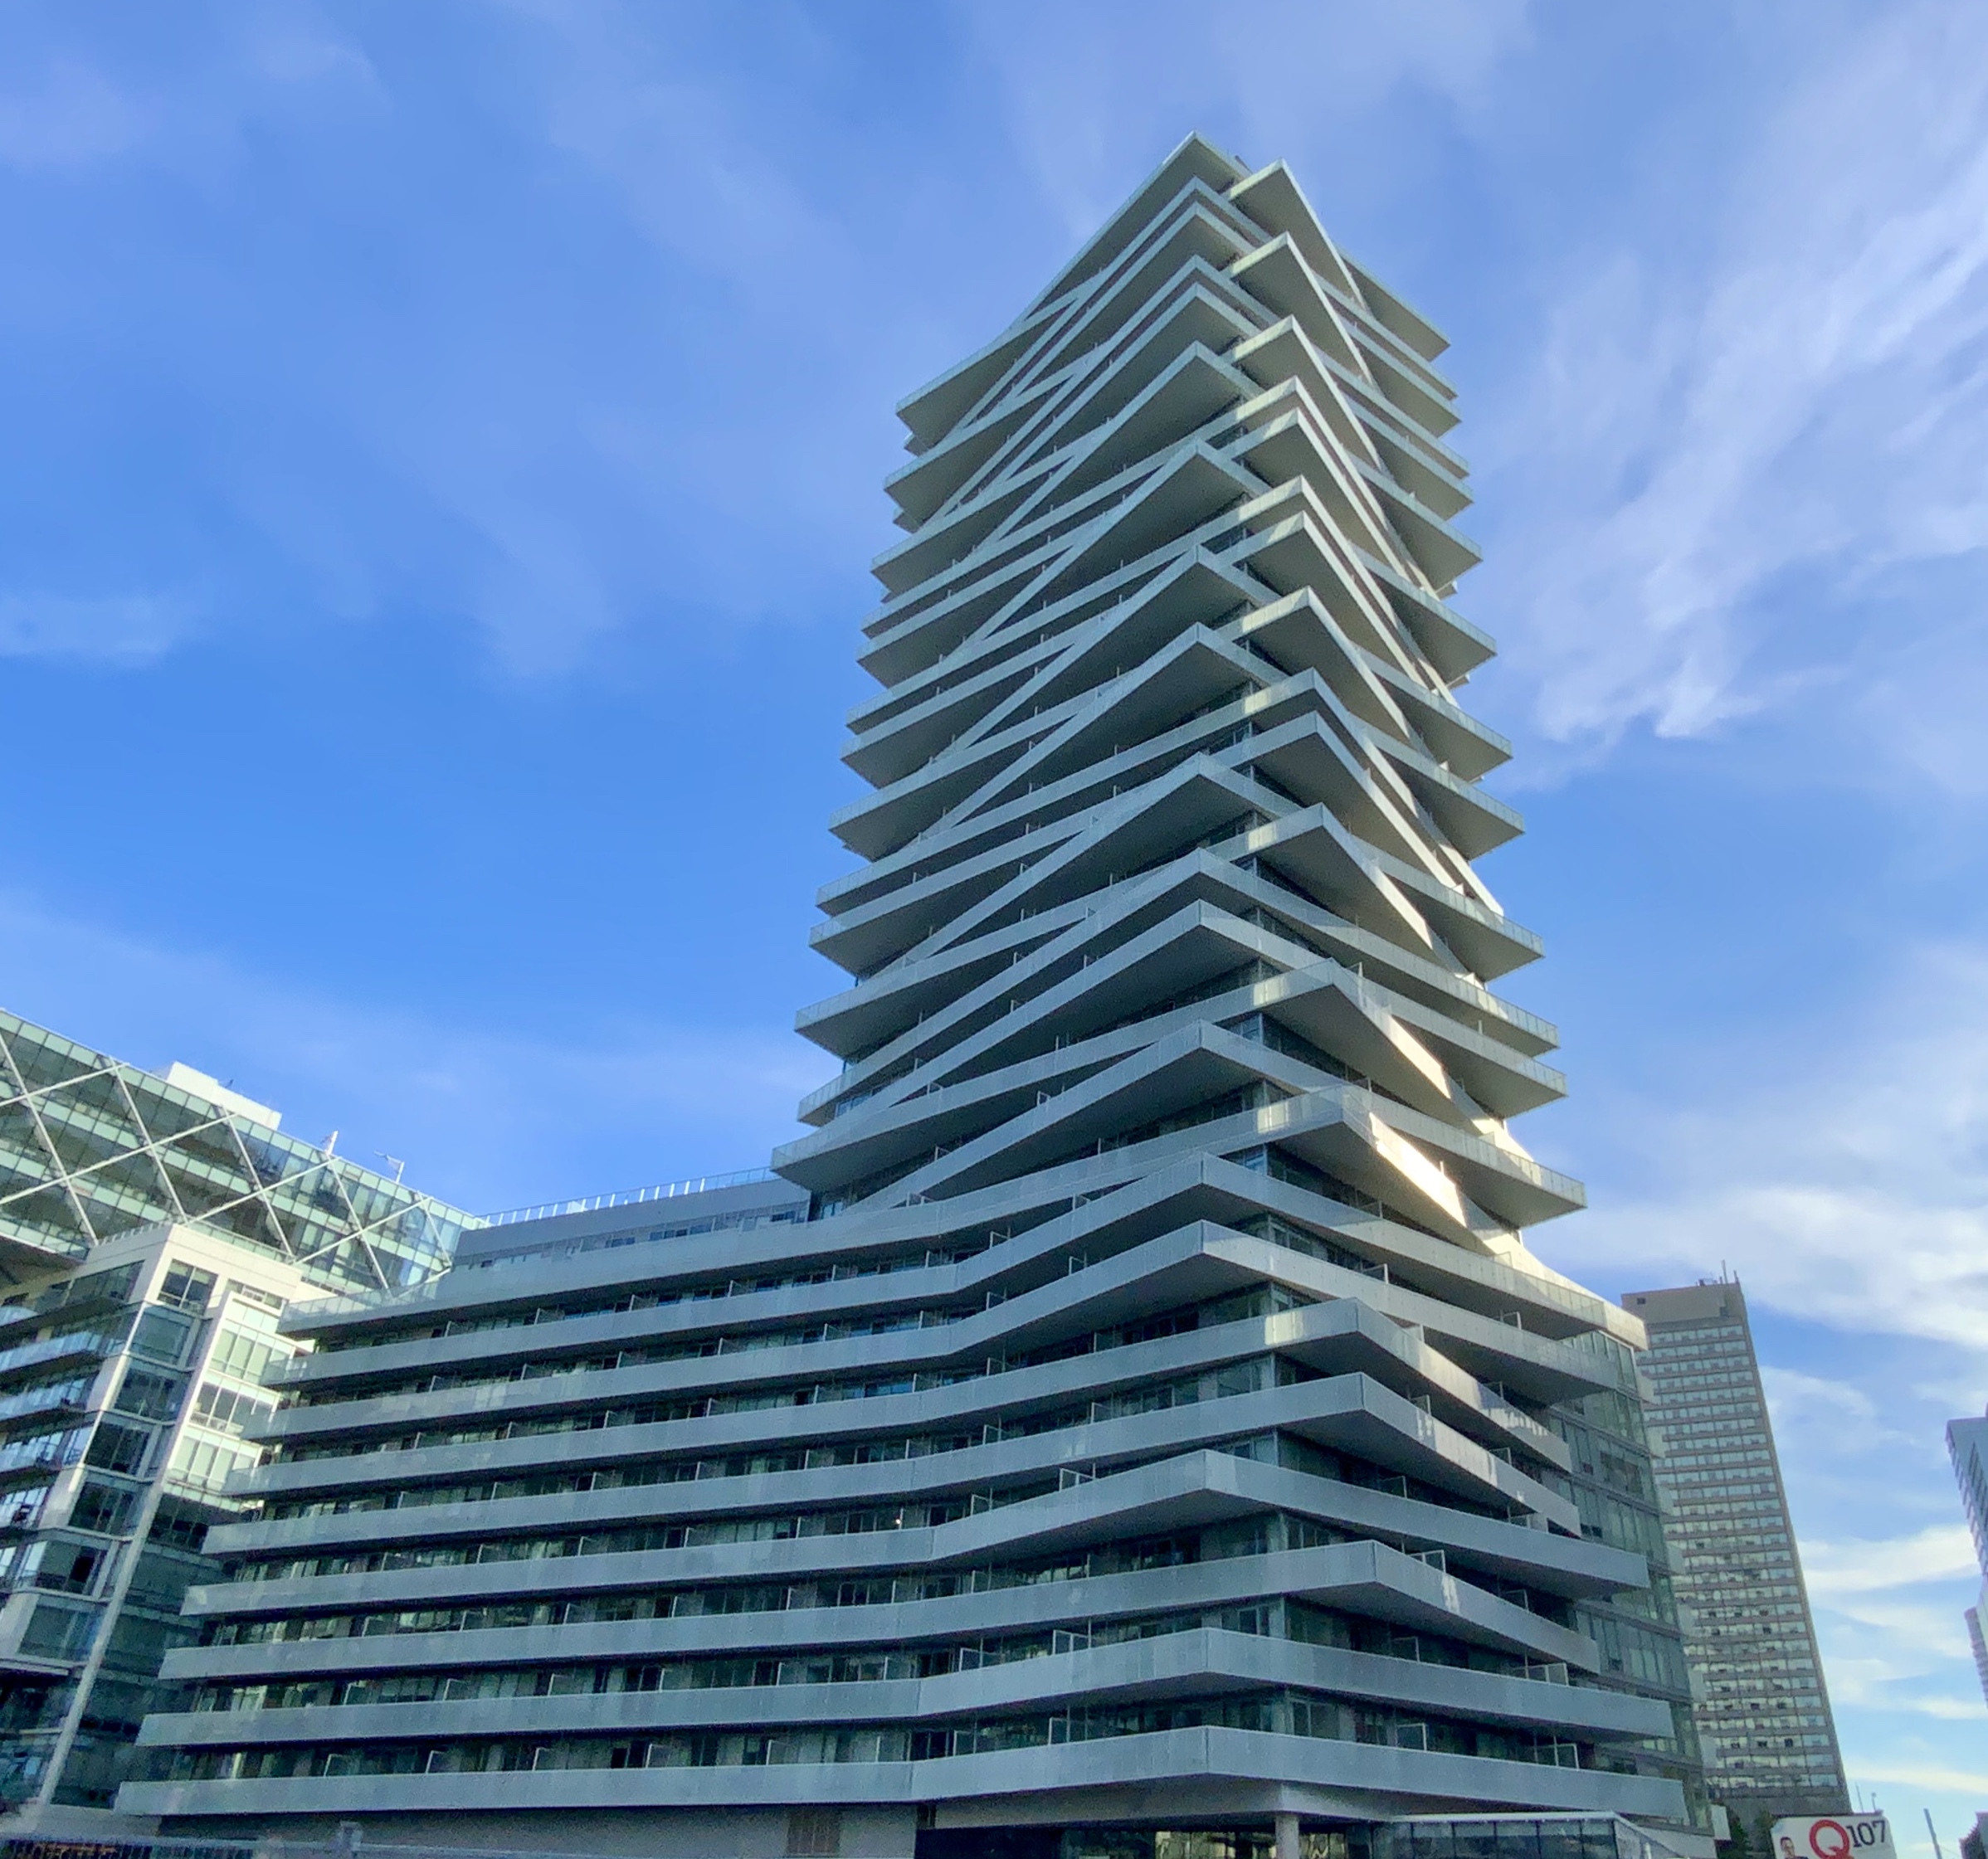 Street view of Pier 27 Condos in Toronto Waterfront.